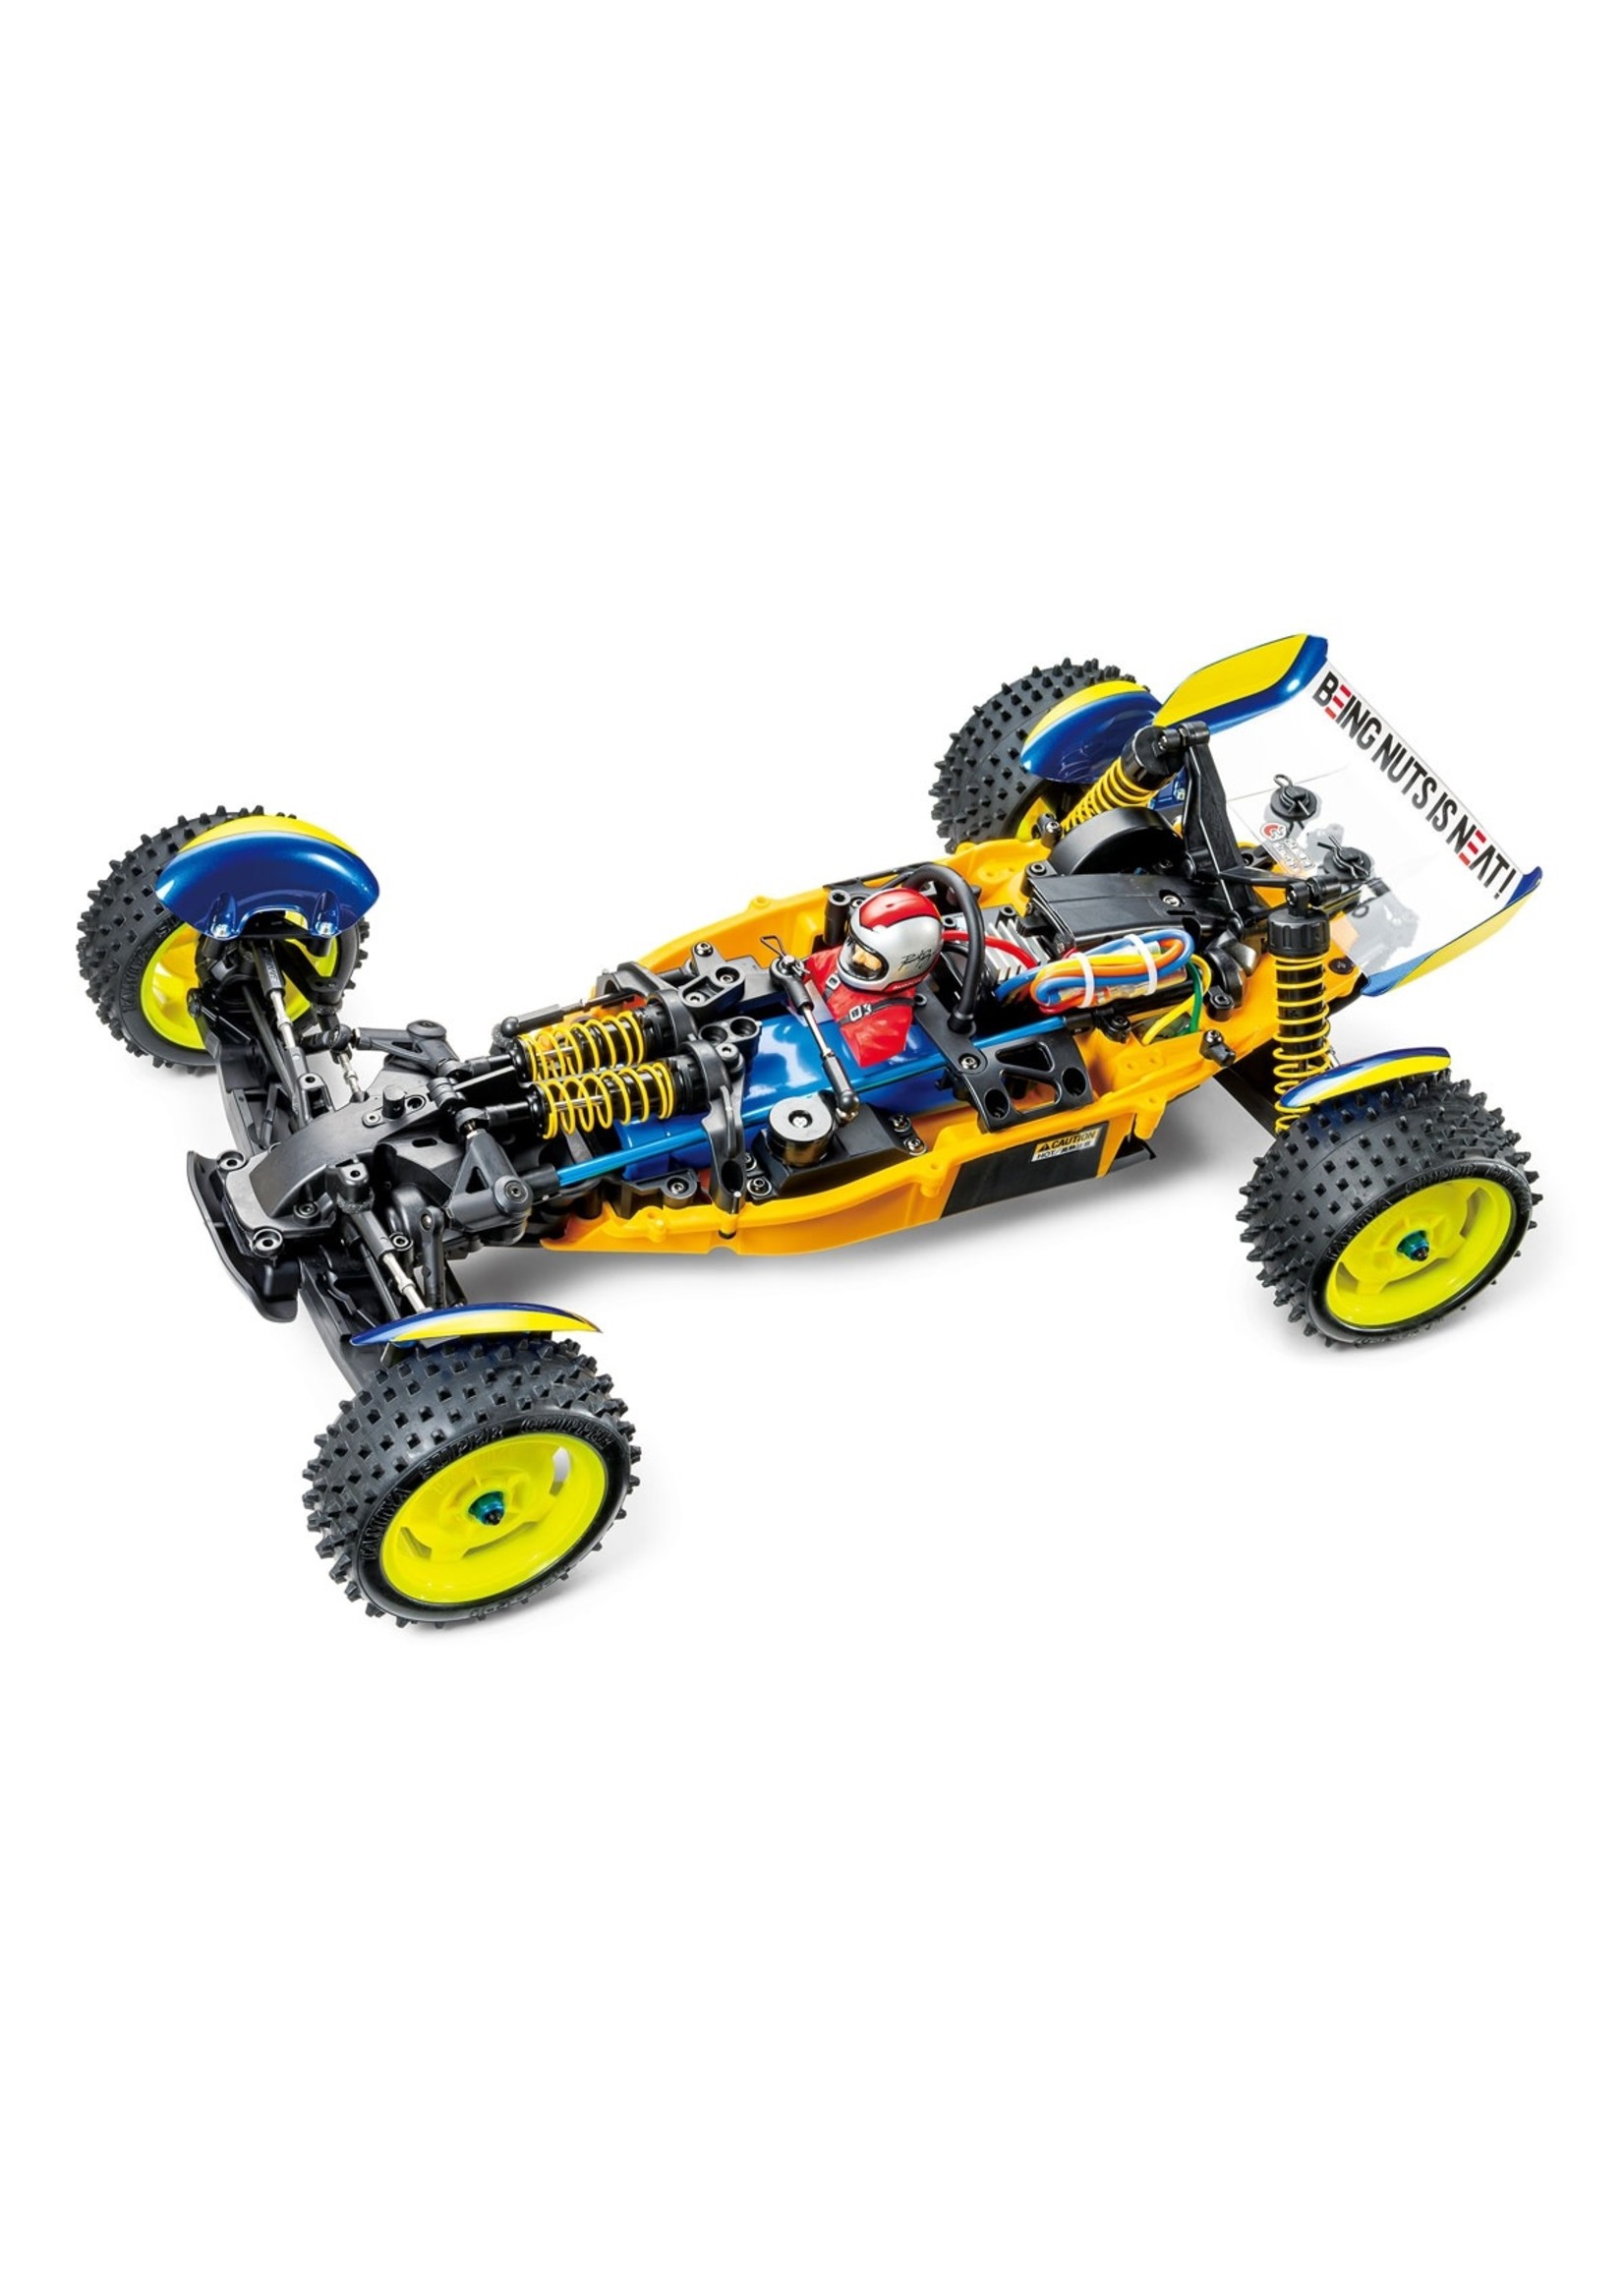 Tamiya 1/10 Super Avante Off-Road Buggy Painted Body - TD4 Chassis Kit